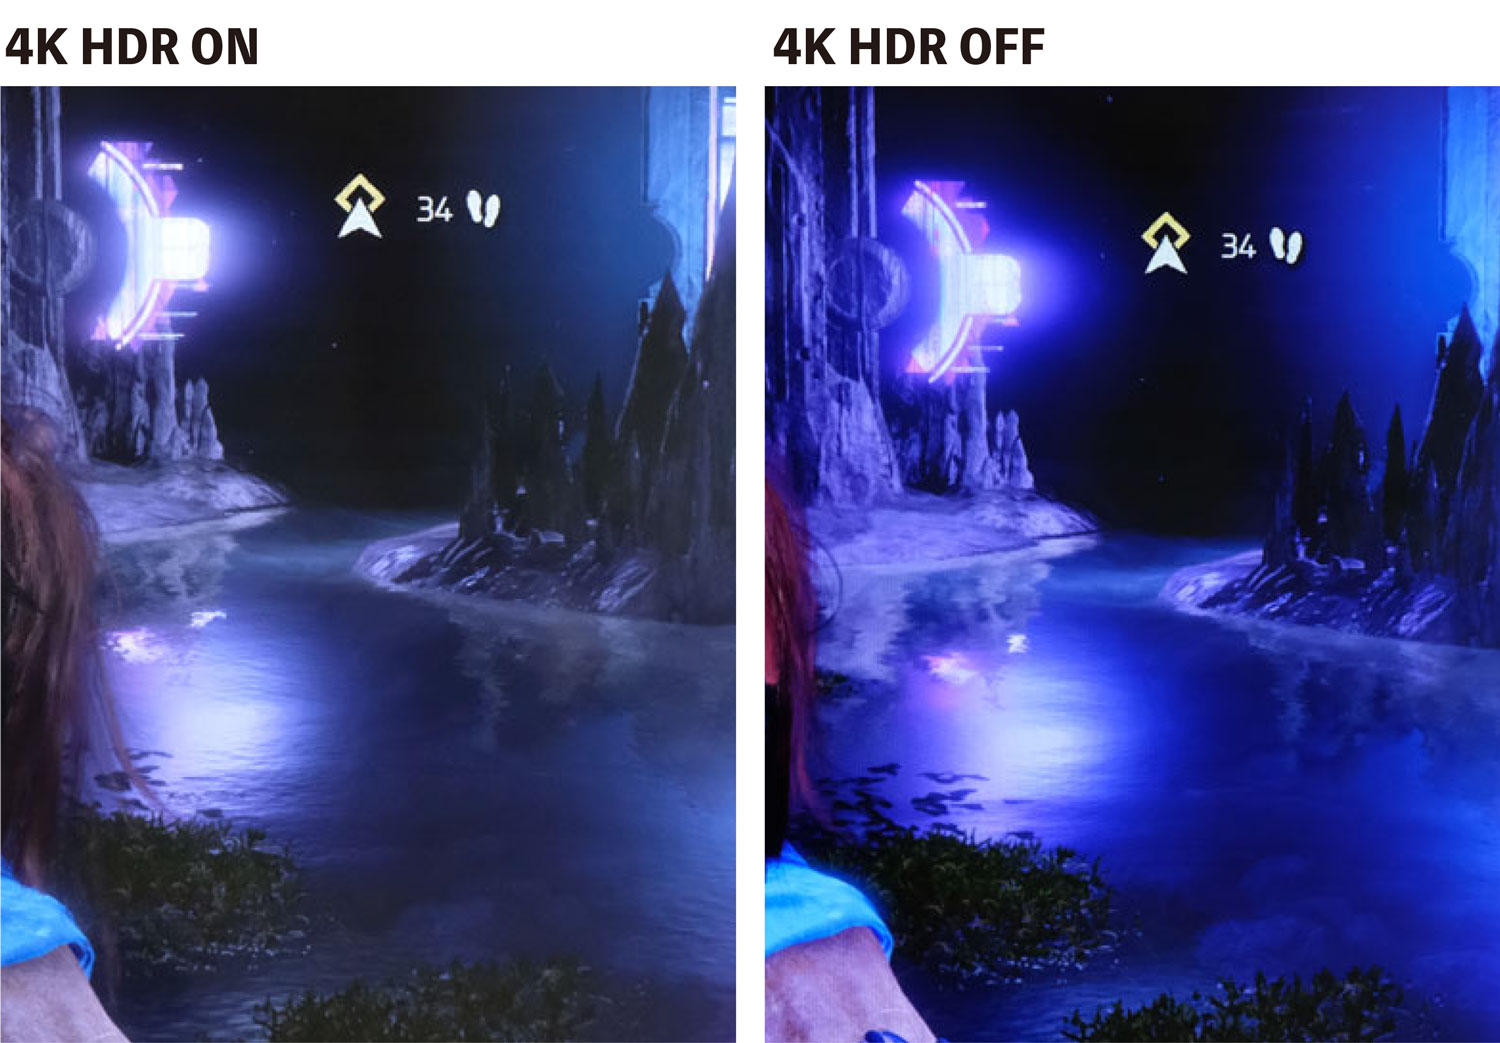 PS4 Pro 4K HDR 比較